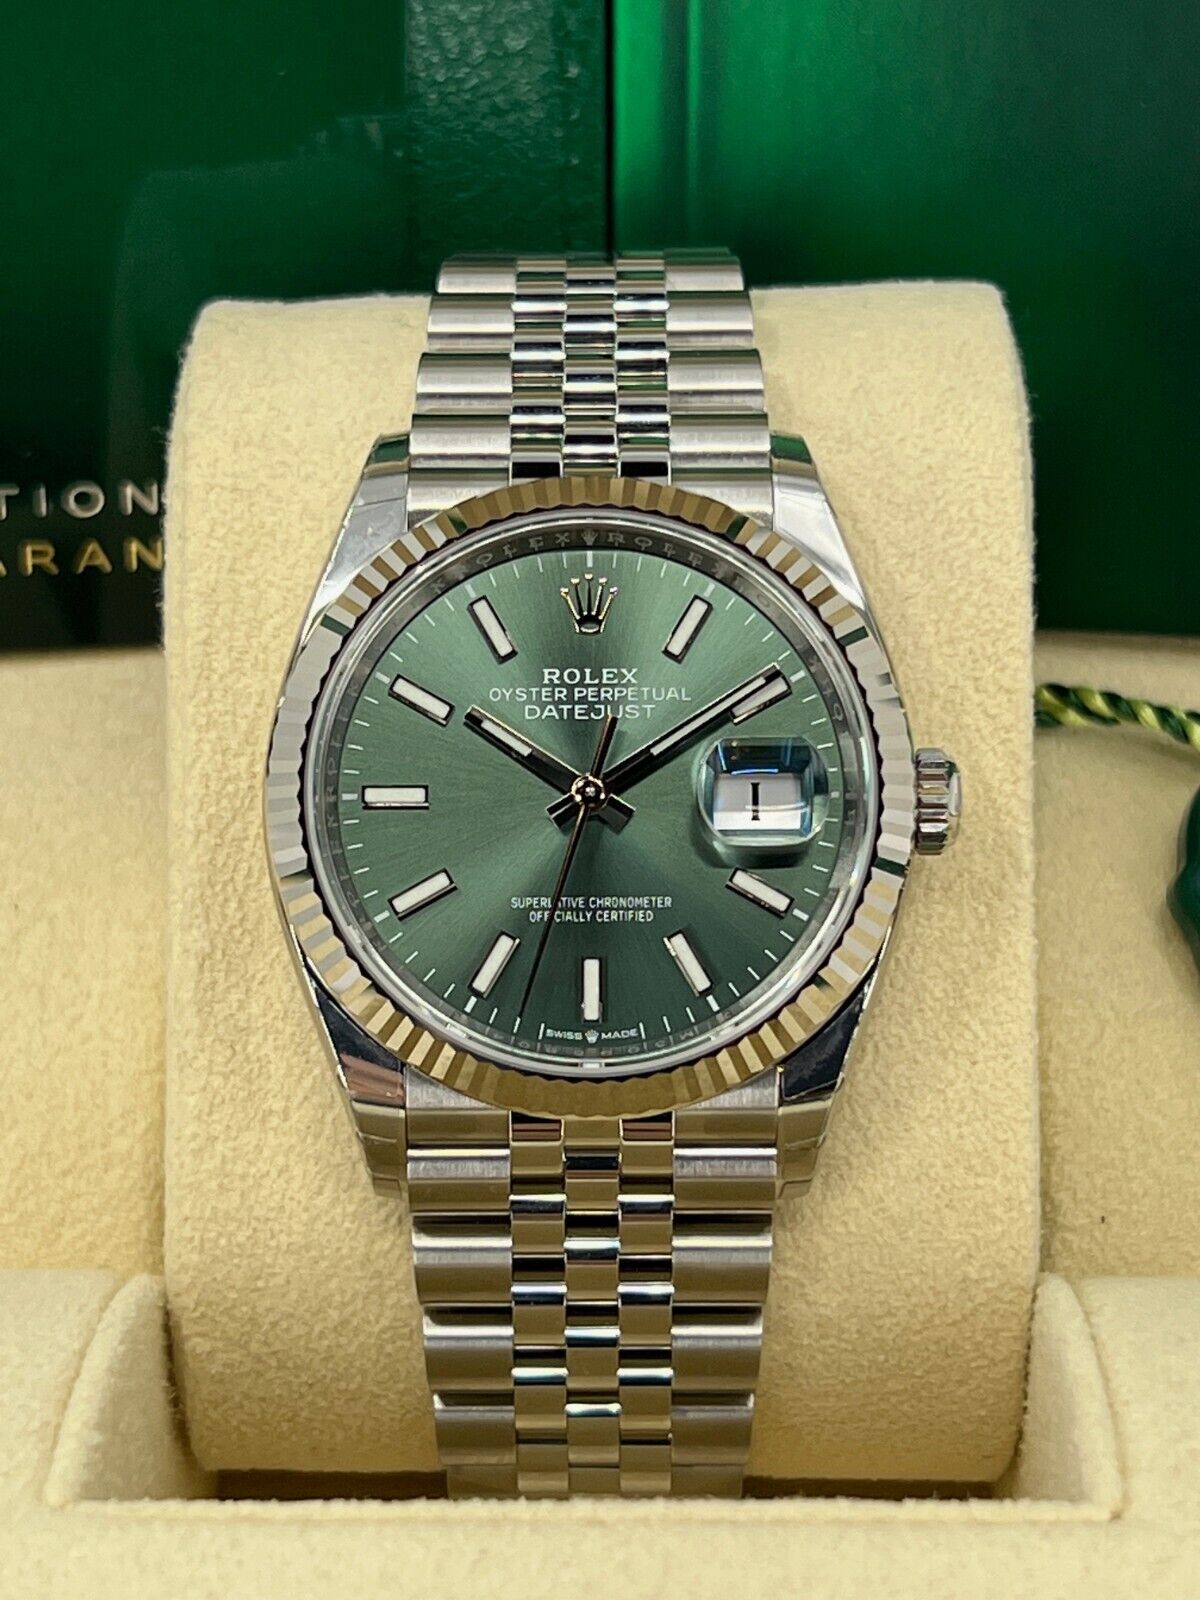 Rolex, Datejust 36, Oystersteel and 18K White Gold, 36mm, Green Mint Dial, Fluted, Jubilee, Ref#126234-0051